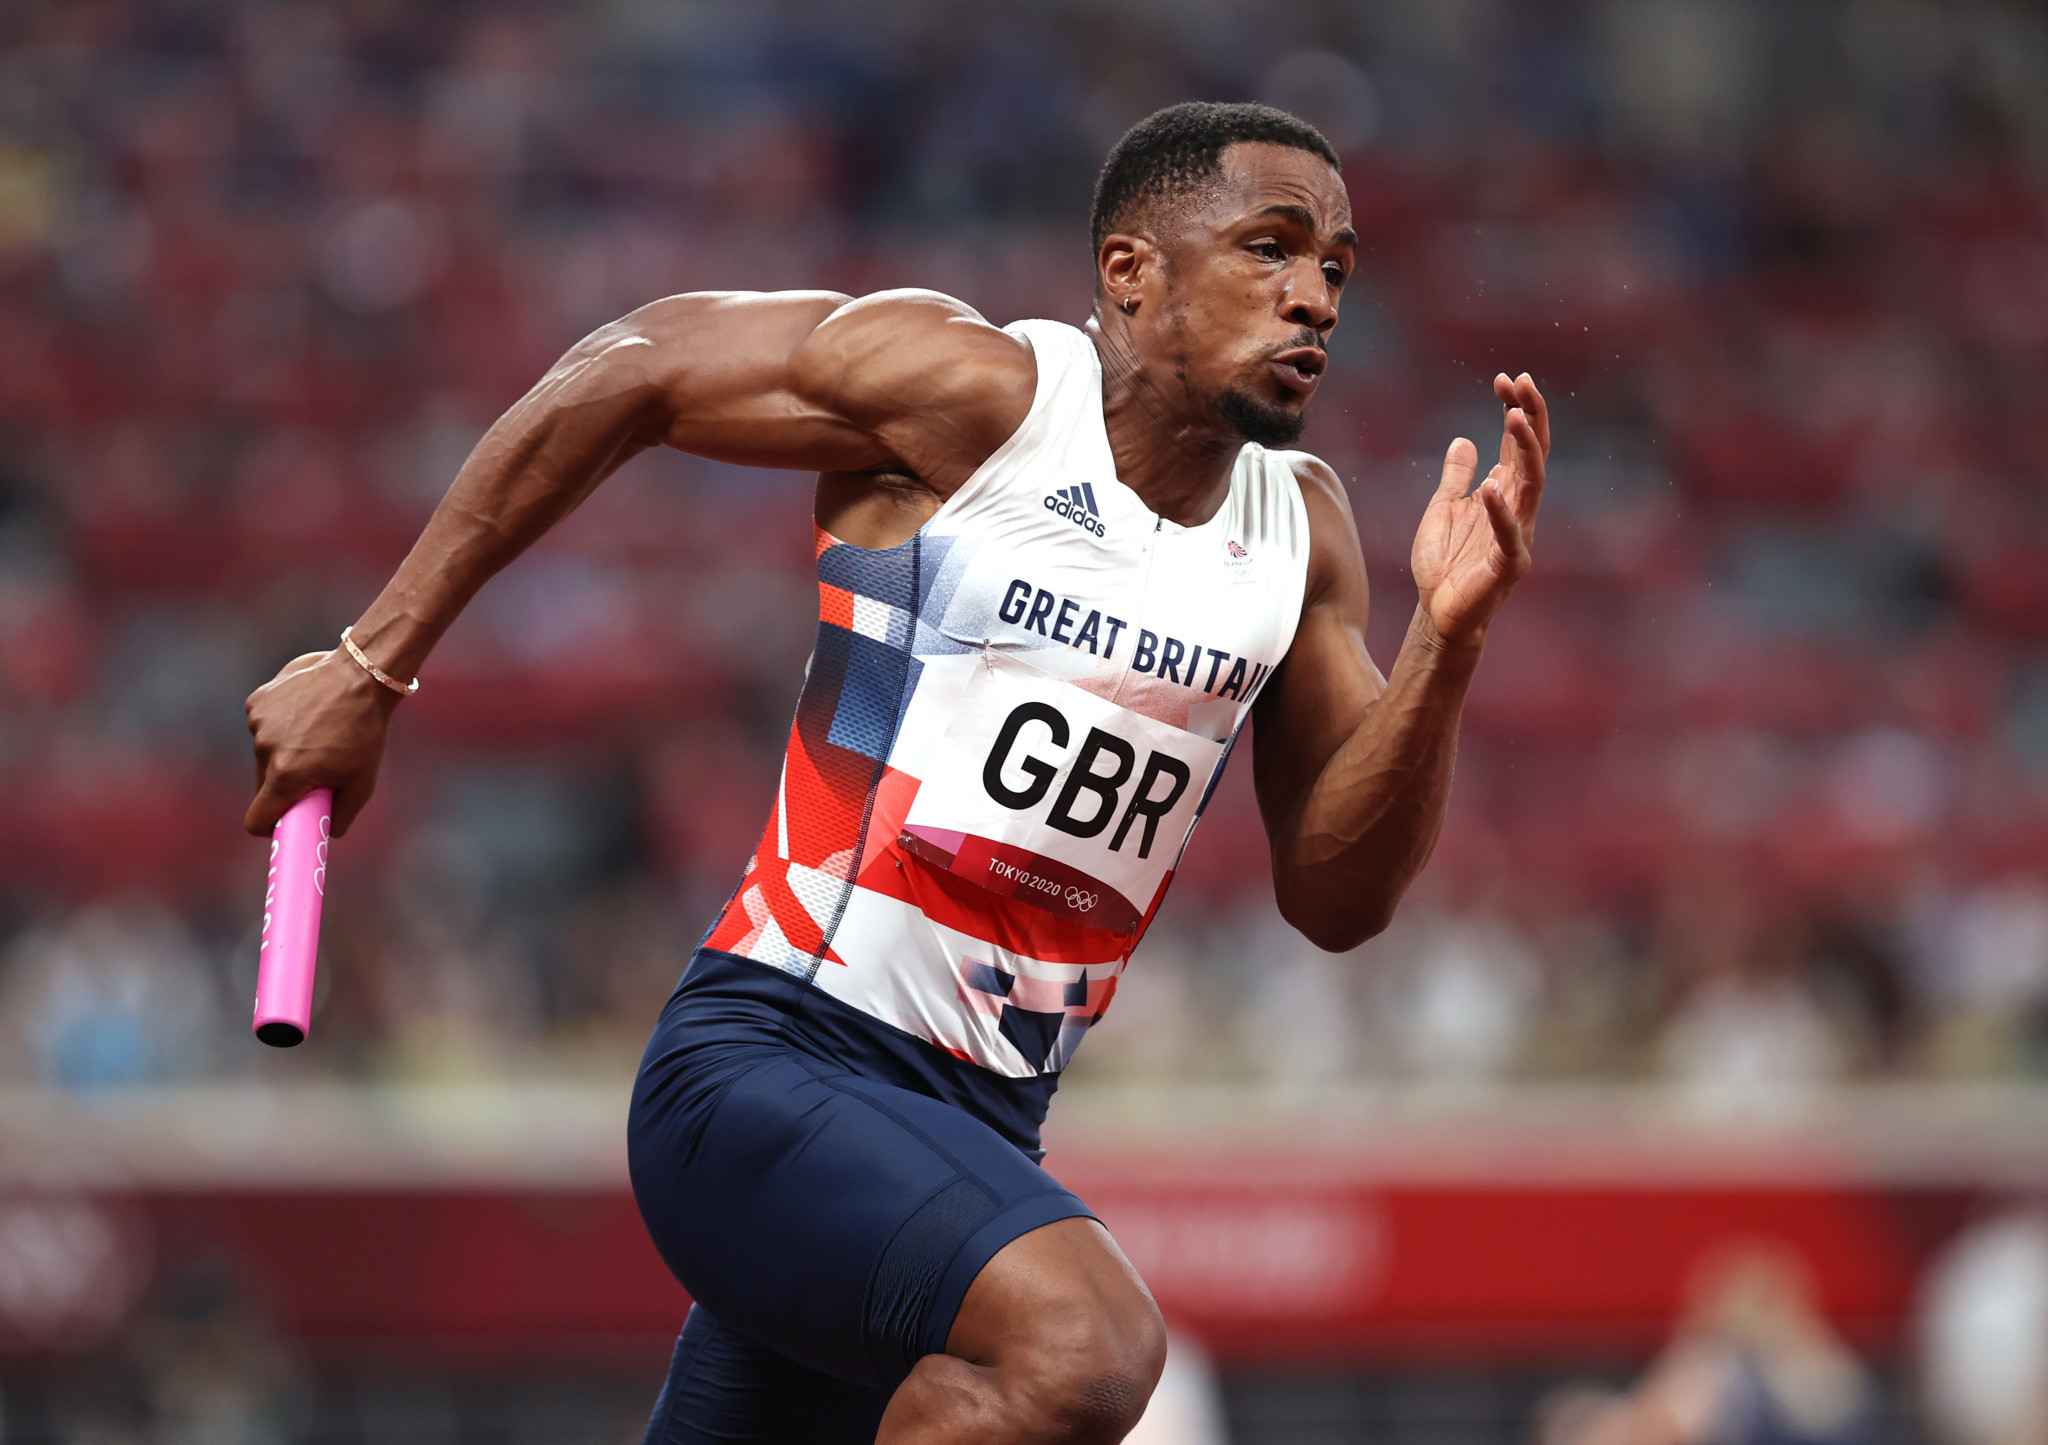 The case of Britain's CJ Ujah was one of six anti-doping rule violations found under the International Testing Agency's programme at Tokyo 2020, and it has been referred to the Court of Arbitration for Sport ©Getty Images